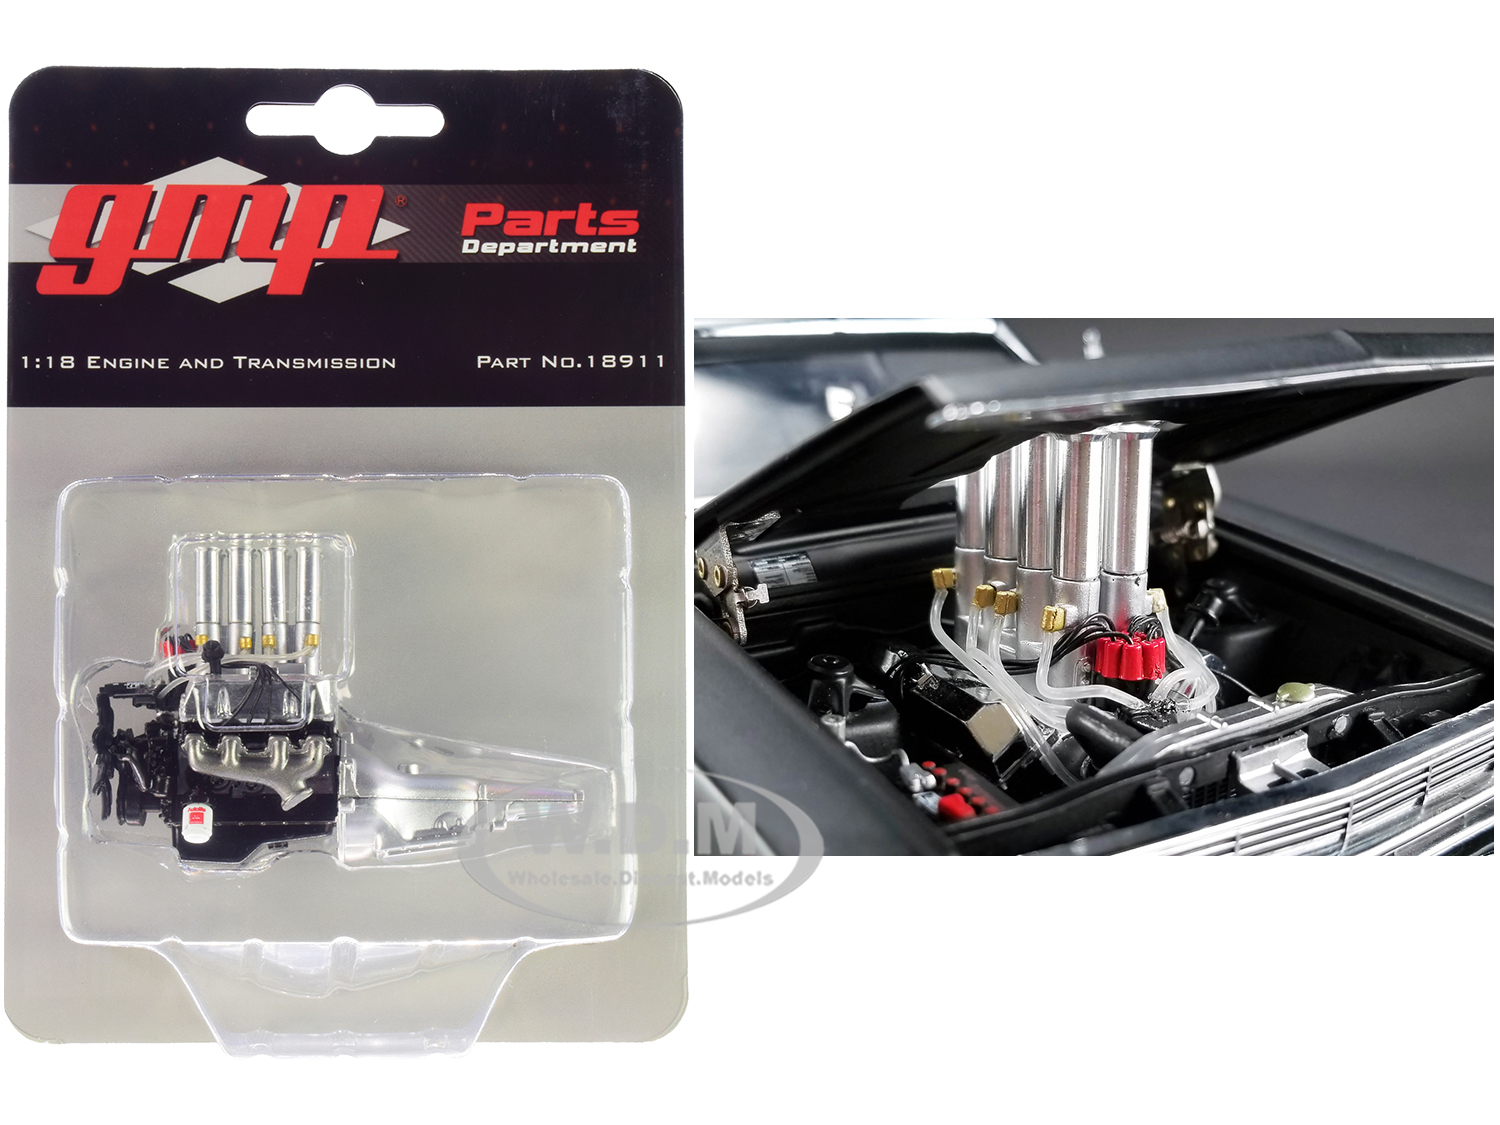 Injected 427 Engine And Transmission Replica From "pork Chops 1966 Ford Fairlane" 1/18 Model By Gmp